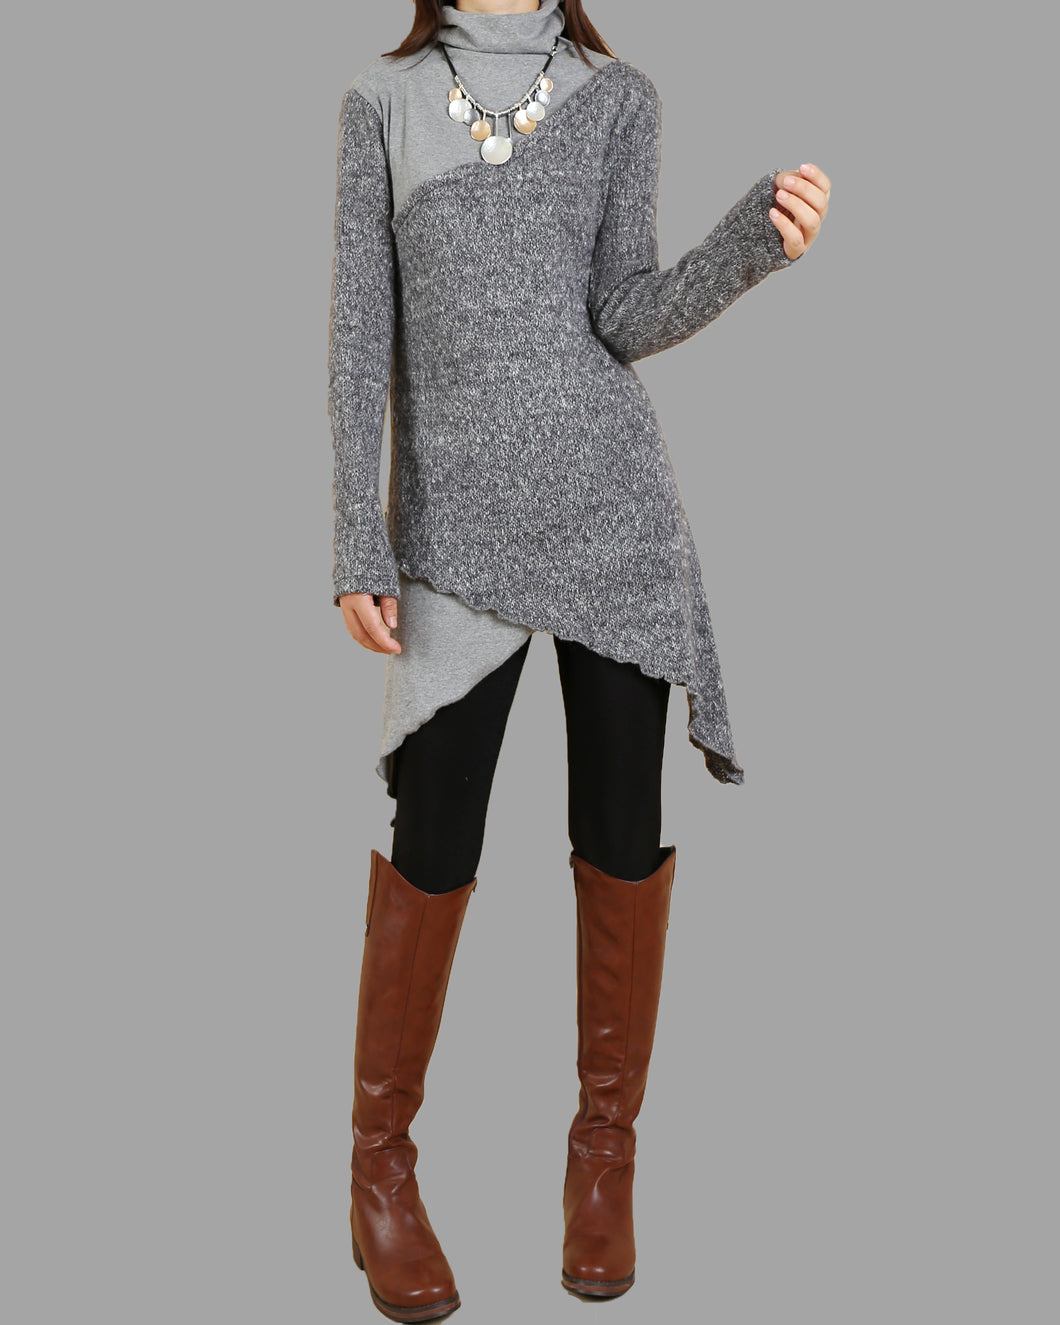 Women's asymmetrical tunic dress/pullover sweater/oversized casual customized plus size tunic top/maternity dress(Y1999S)